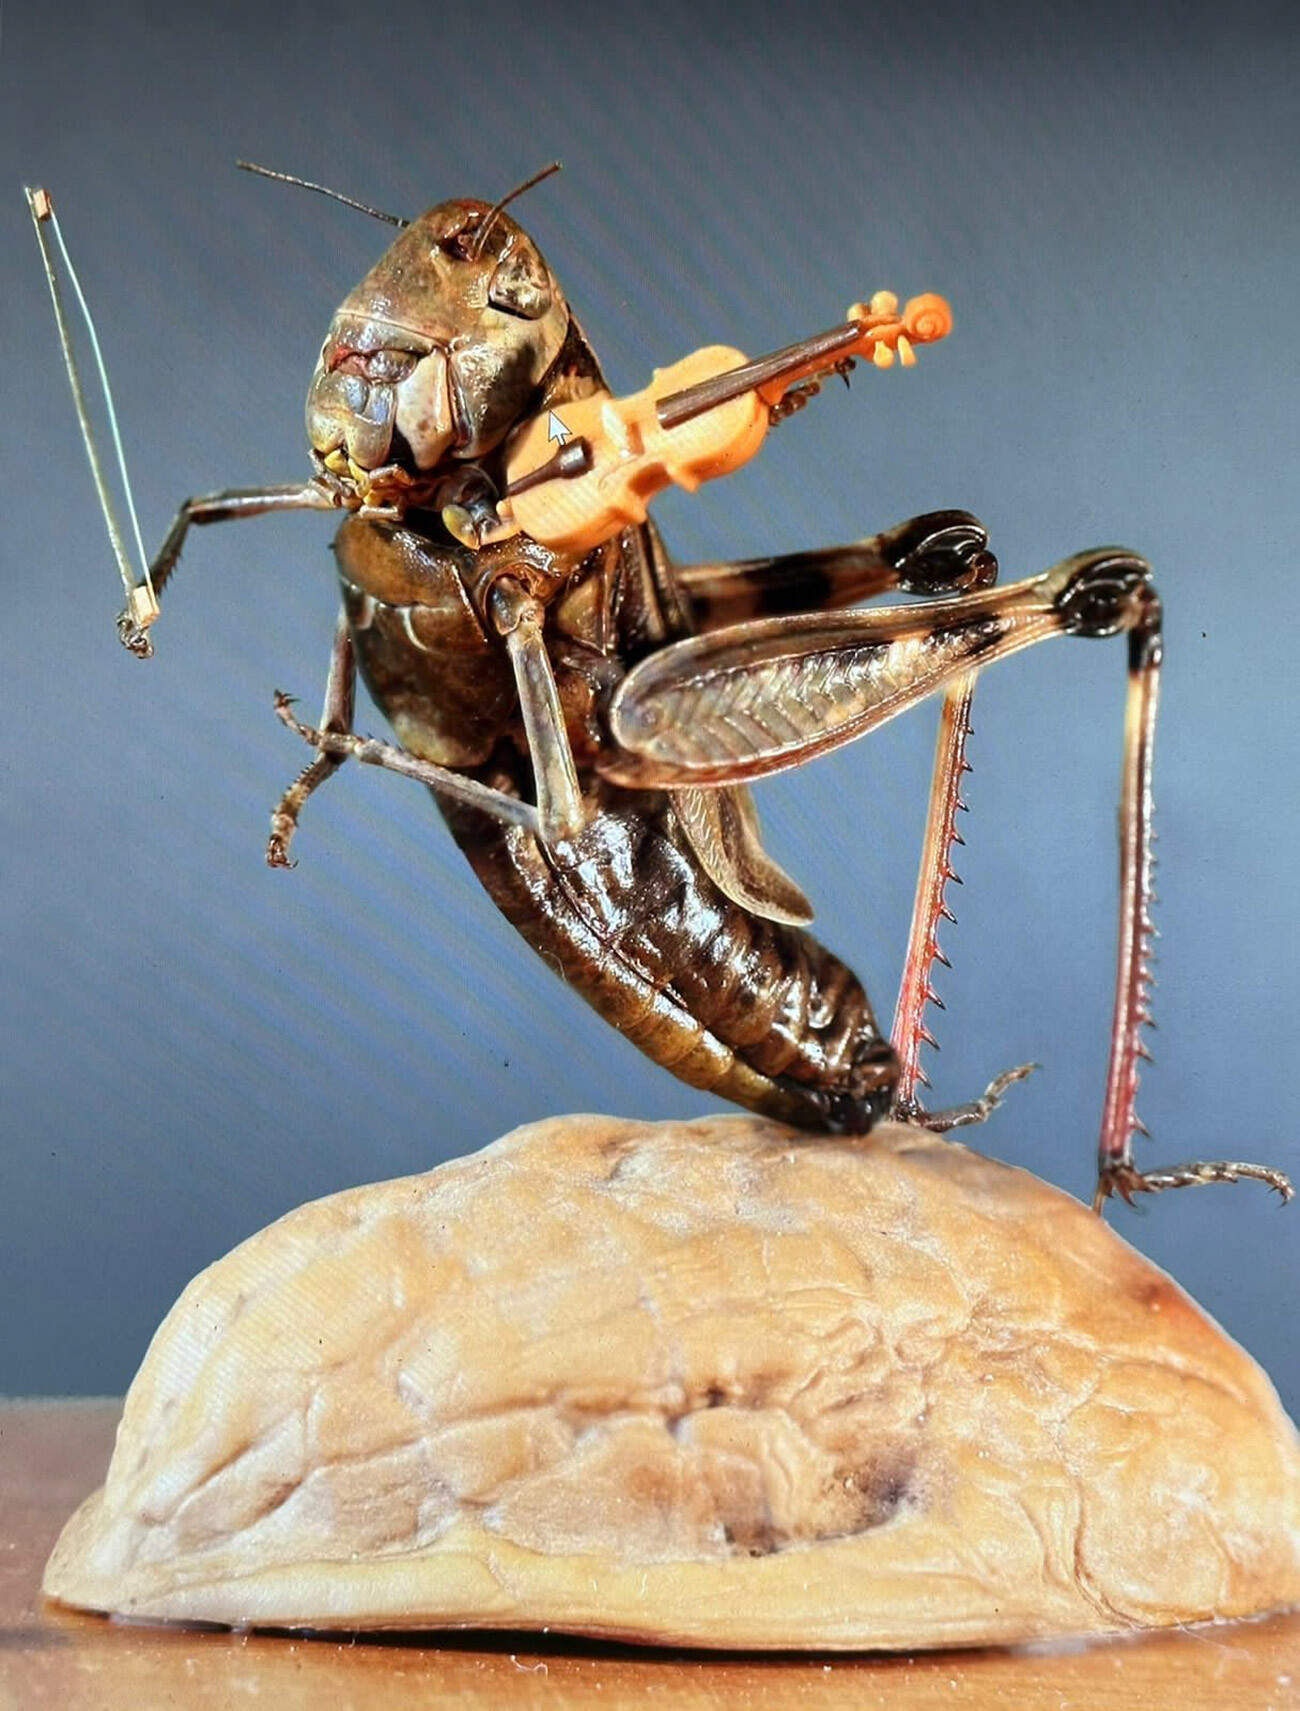 Grasshopper with violin. The violin is 12 mm long